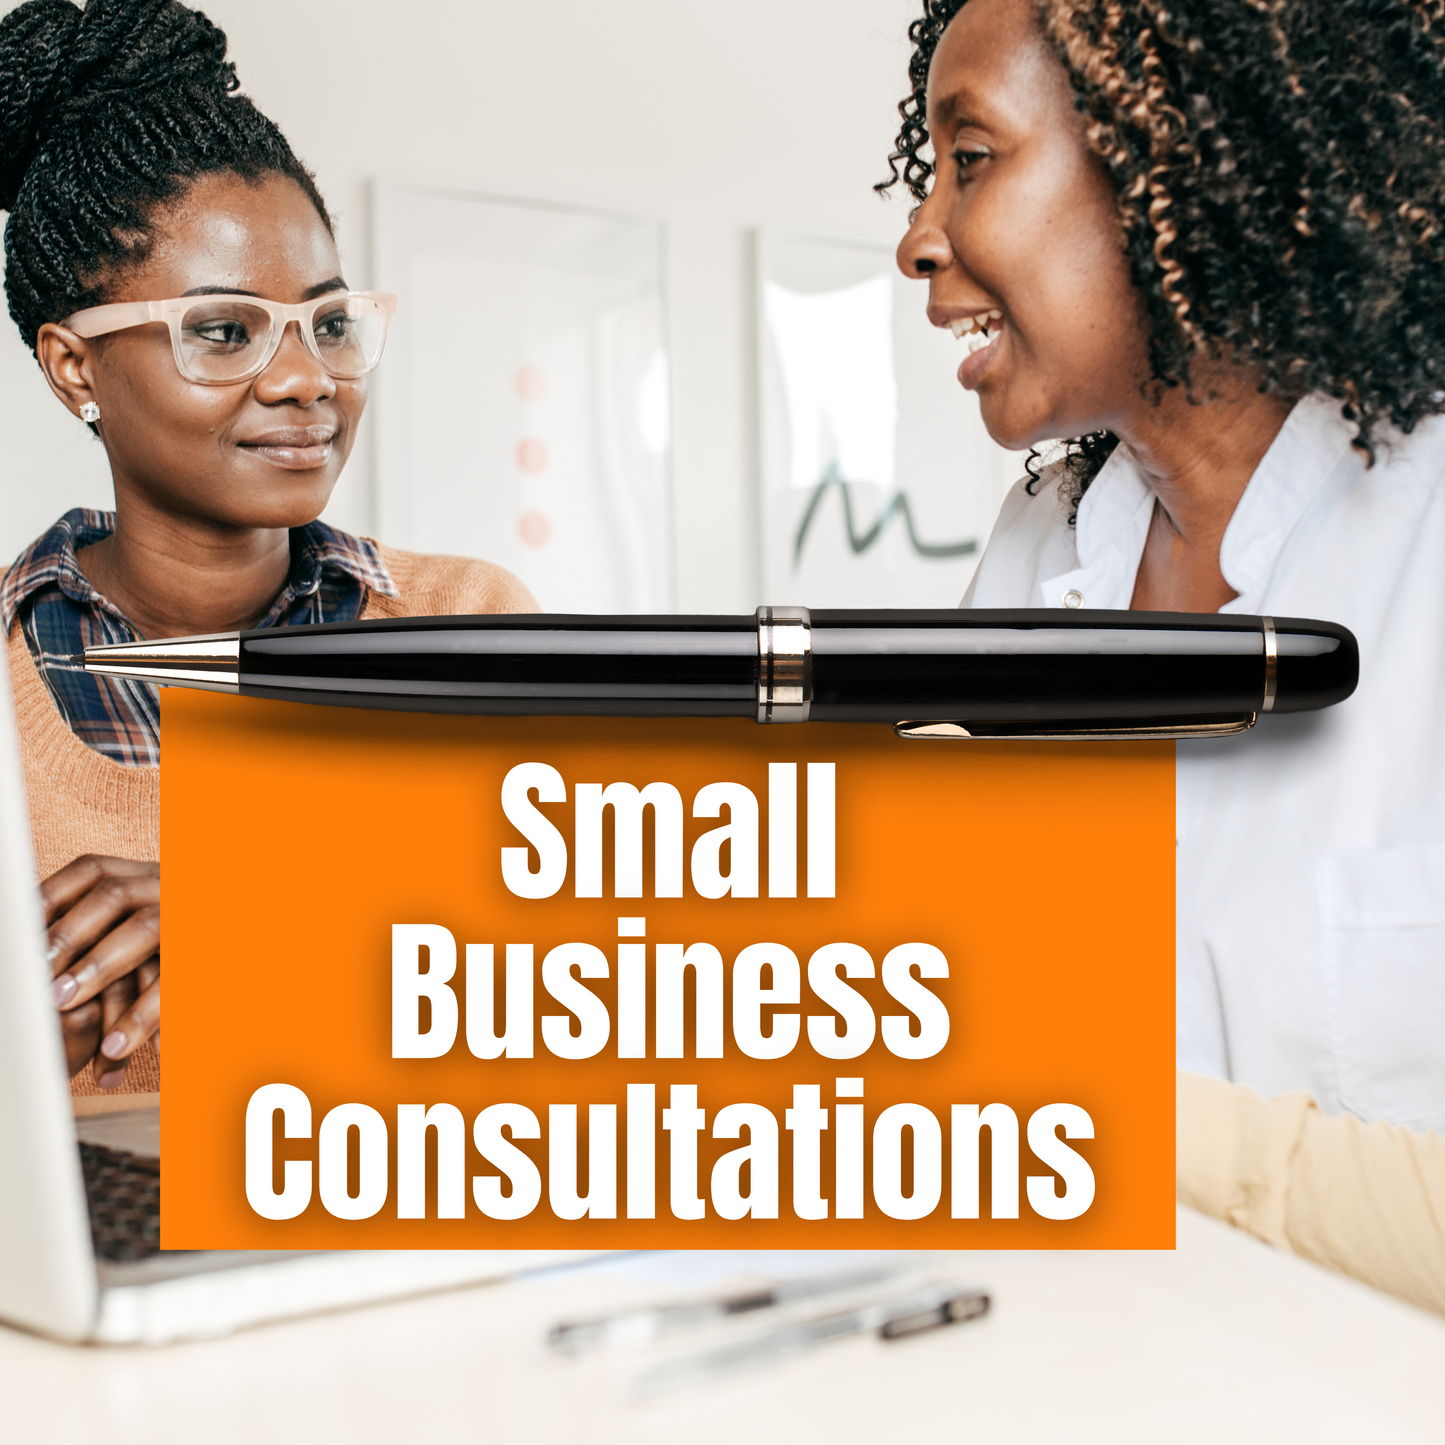 Small Business Consultations